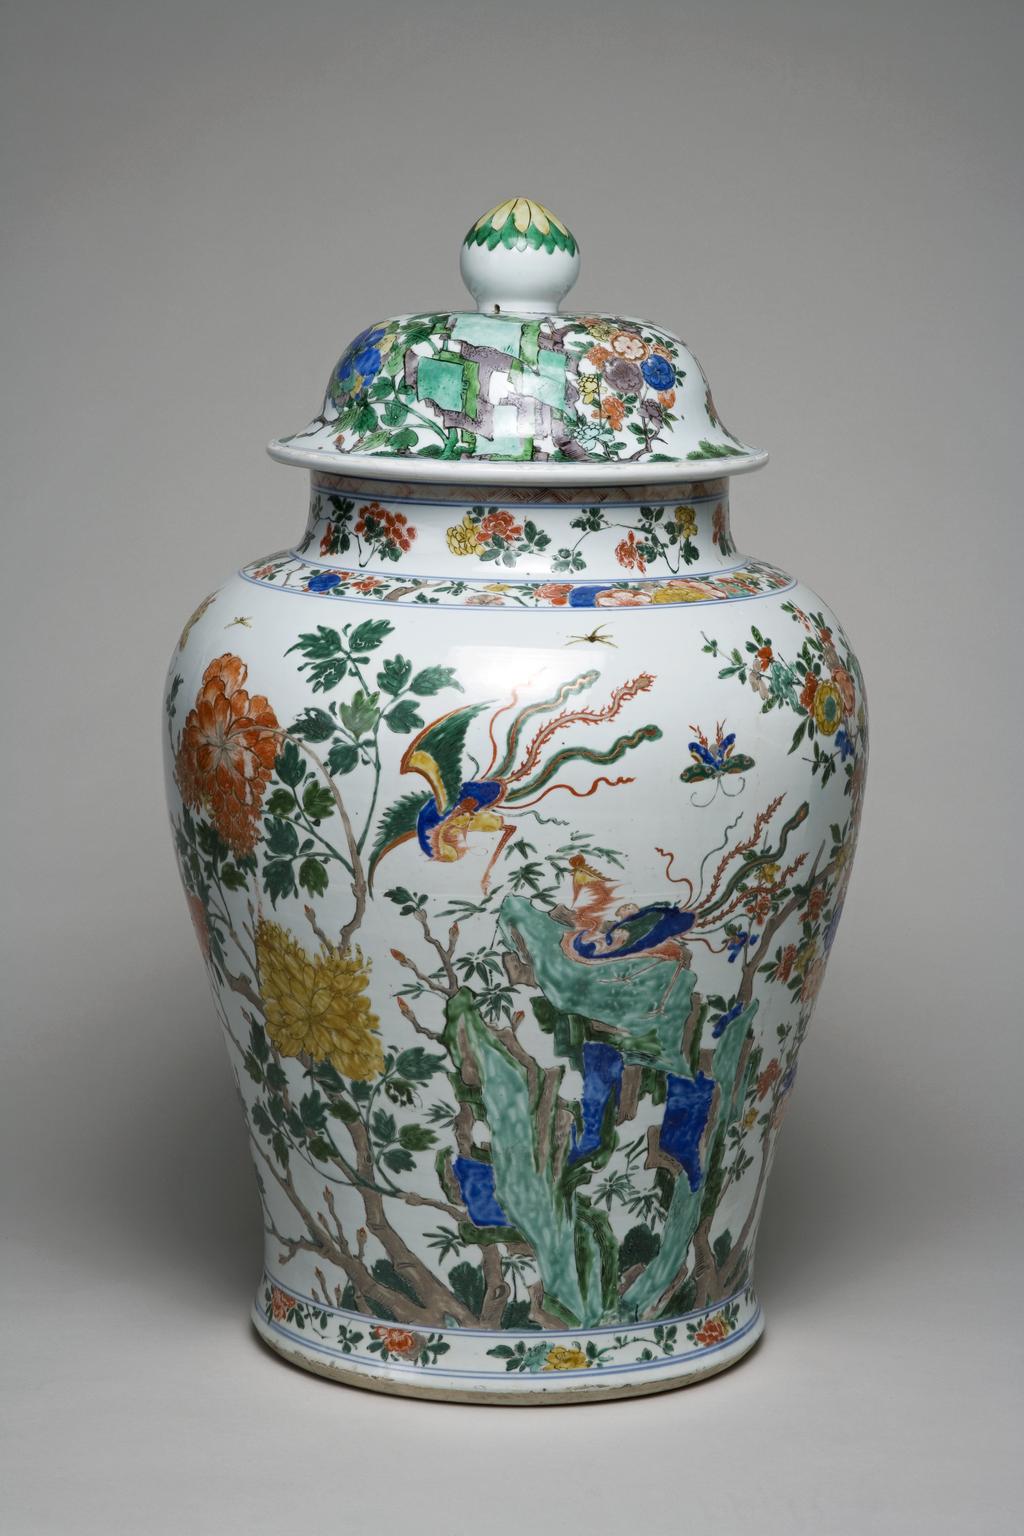 An image of C.17.1 & A-1948: Vase and Cover from a Garniture of Five Vases. Hard-paste porcelain, painted overglaze in enamels in the famille verte palette, and gilt, height 80 cm 1680-1720. Chinese. Kangxi Period (1662-1722). Qing Dynasty (1644-1912). Given by Anthony de Rothschild through the National Art Collections Fund.C.17.2 & A-1948: Vase and Cover from a Garniture of Five Vases. Hard-paste porcelain, painted overglaze in enamels in the famille verte palette, and gilt, height 81.5 cm 1680-1720. Chinese. Kangxi Period (1662-1722). Qing Dynasty (1644-1912).C.17.3 & A-1948: Vase and Cover from a Garniture of Five Vases. Hard-paste porcelain, painted overglaze in enamels in the famille verte palette, and gilt, height 80 cm 1680-1720. Chinese. Kangxi Period (1662-1722). Qing Dynasty (1644-1912). Production Notes: Post-conservation. Acquisition Credit: Given by Anthony de Rothschild through the National Art Collections Fund.